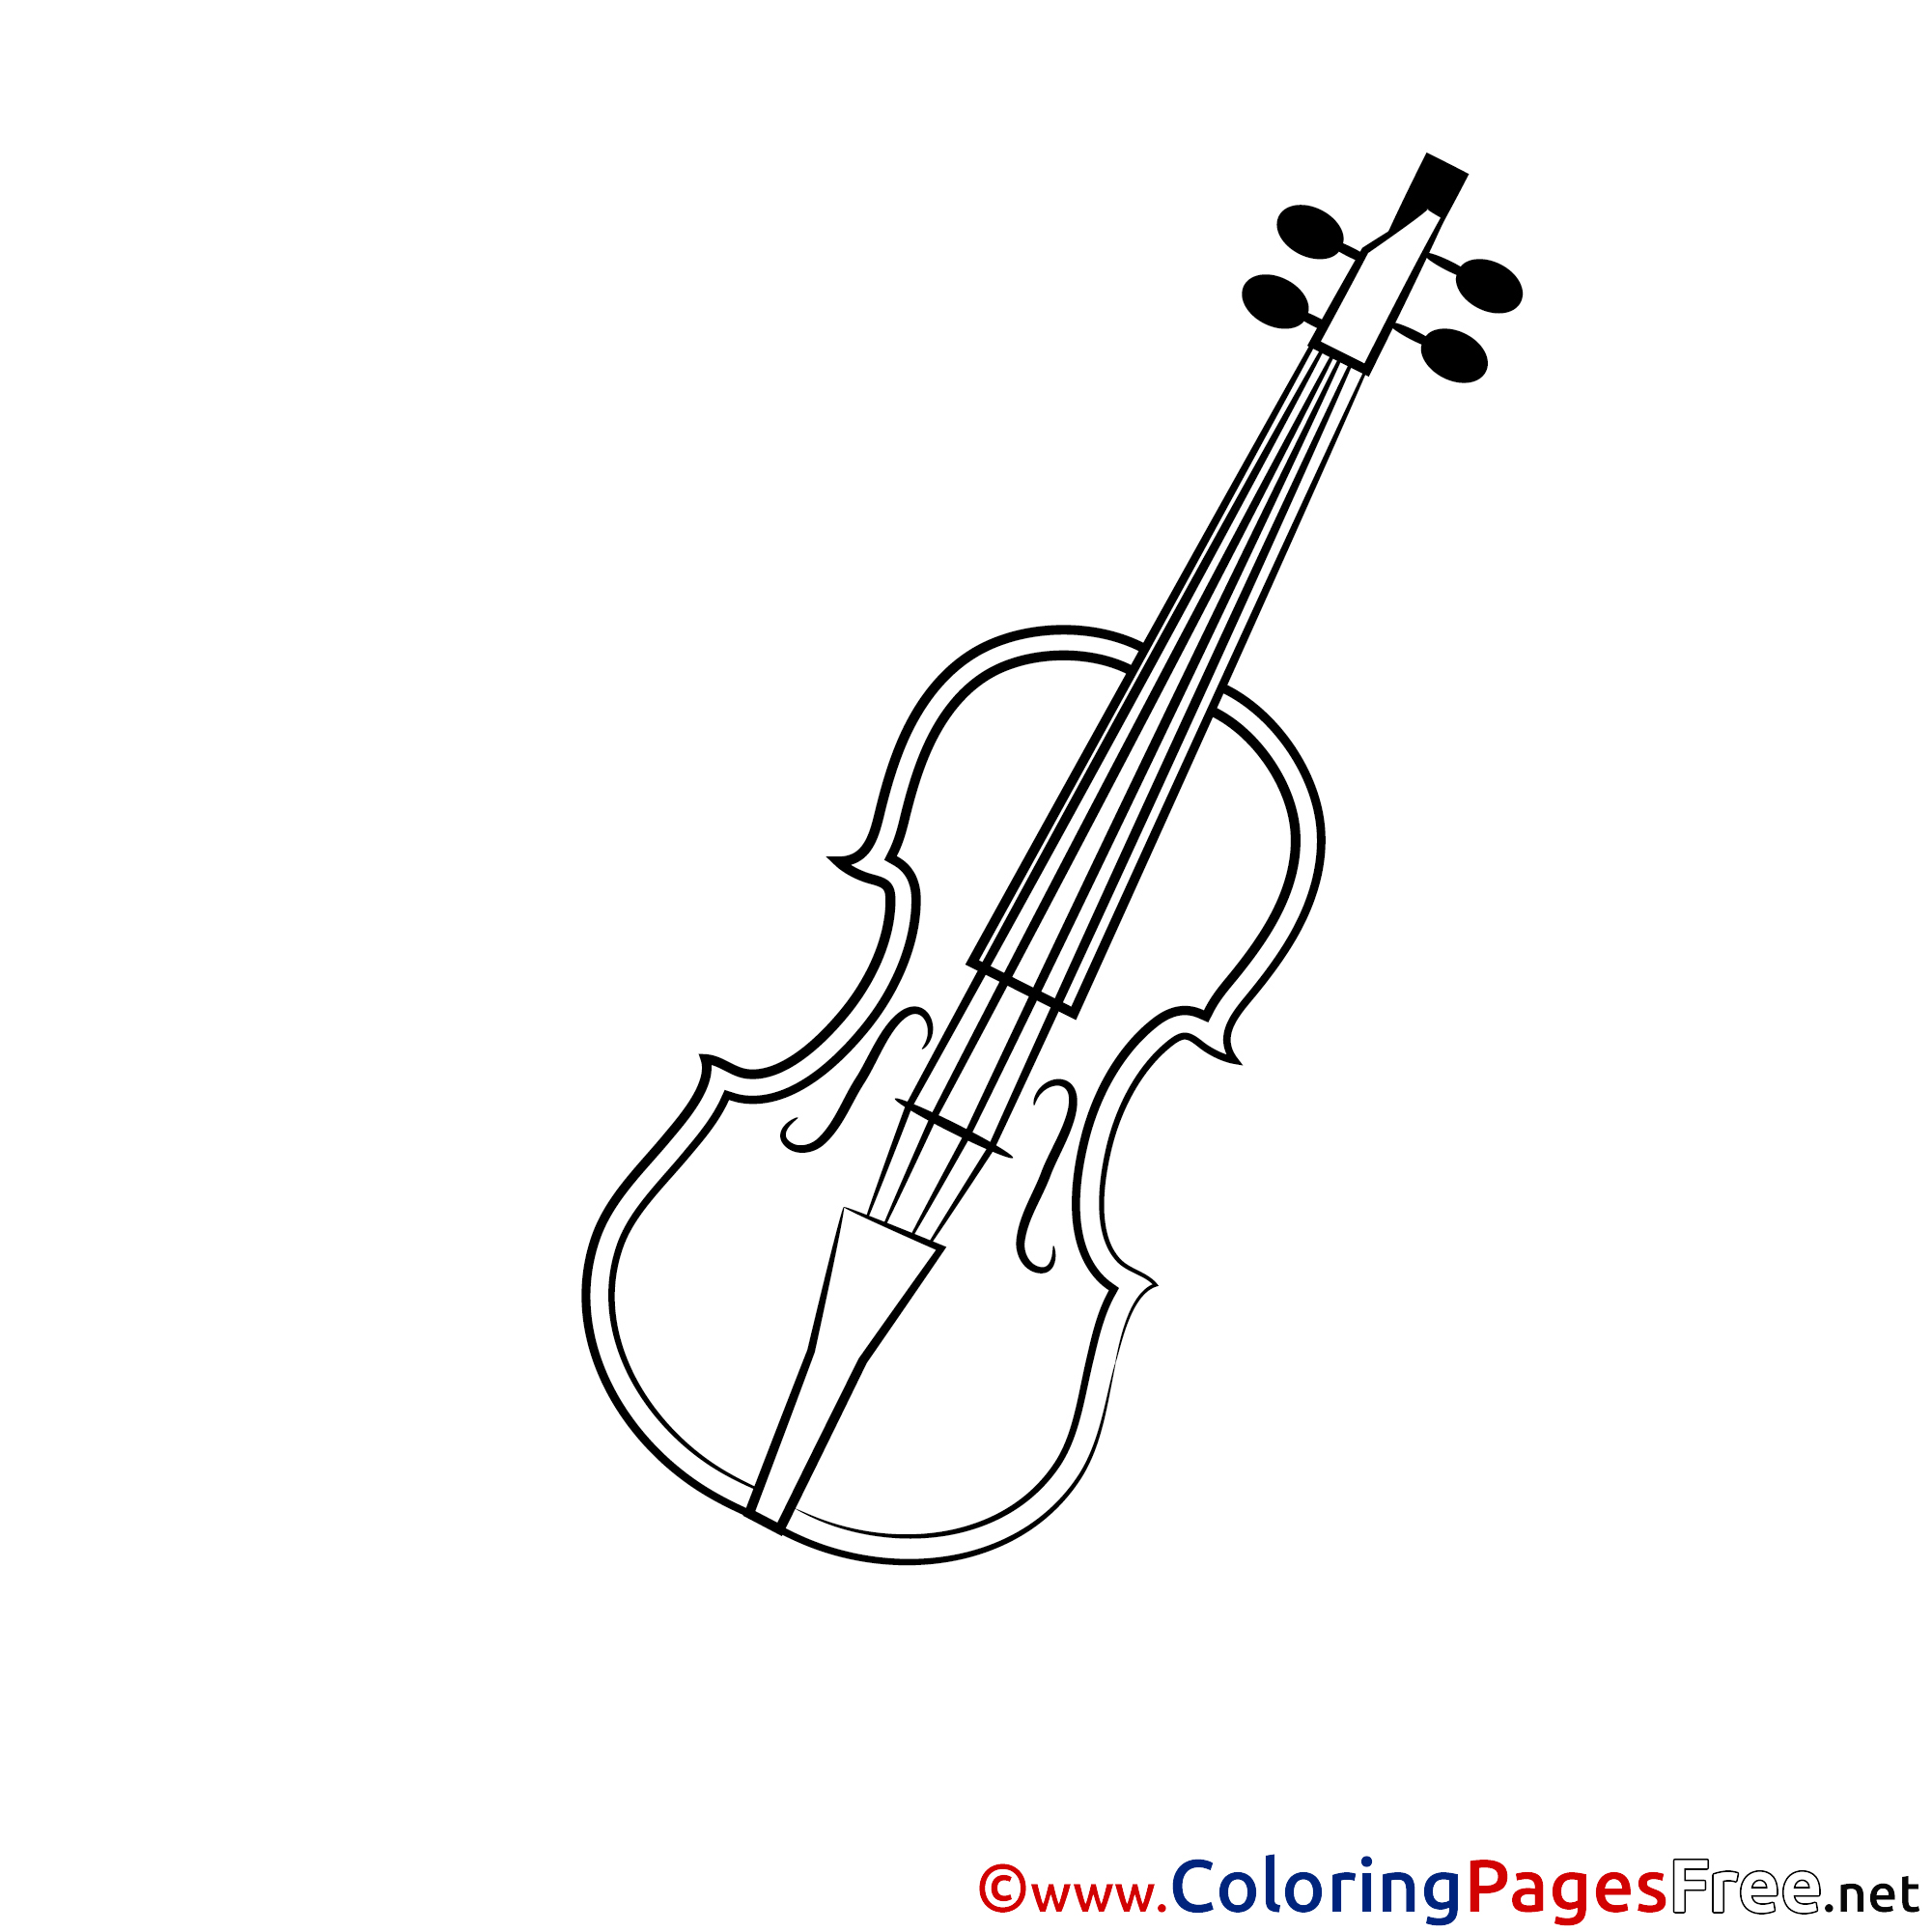 Download Violin Children Coloring Pages free